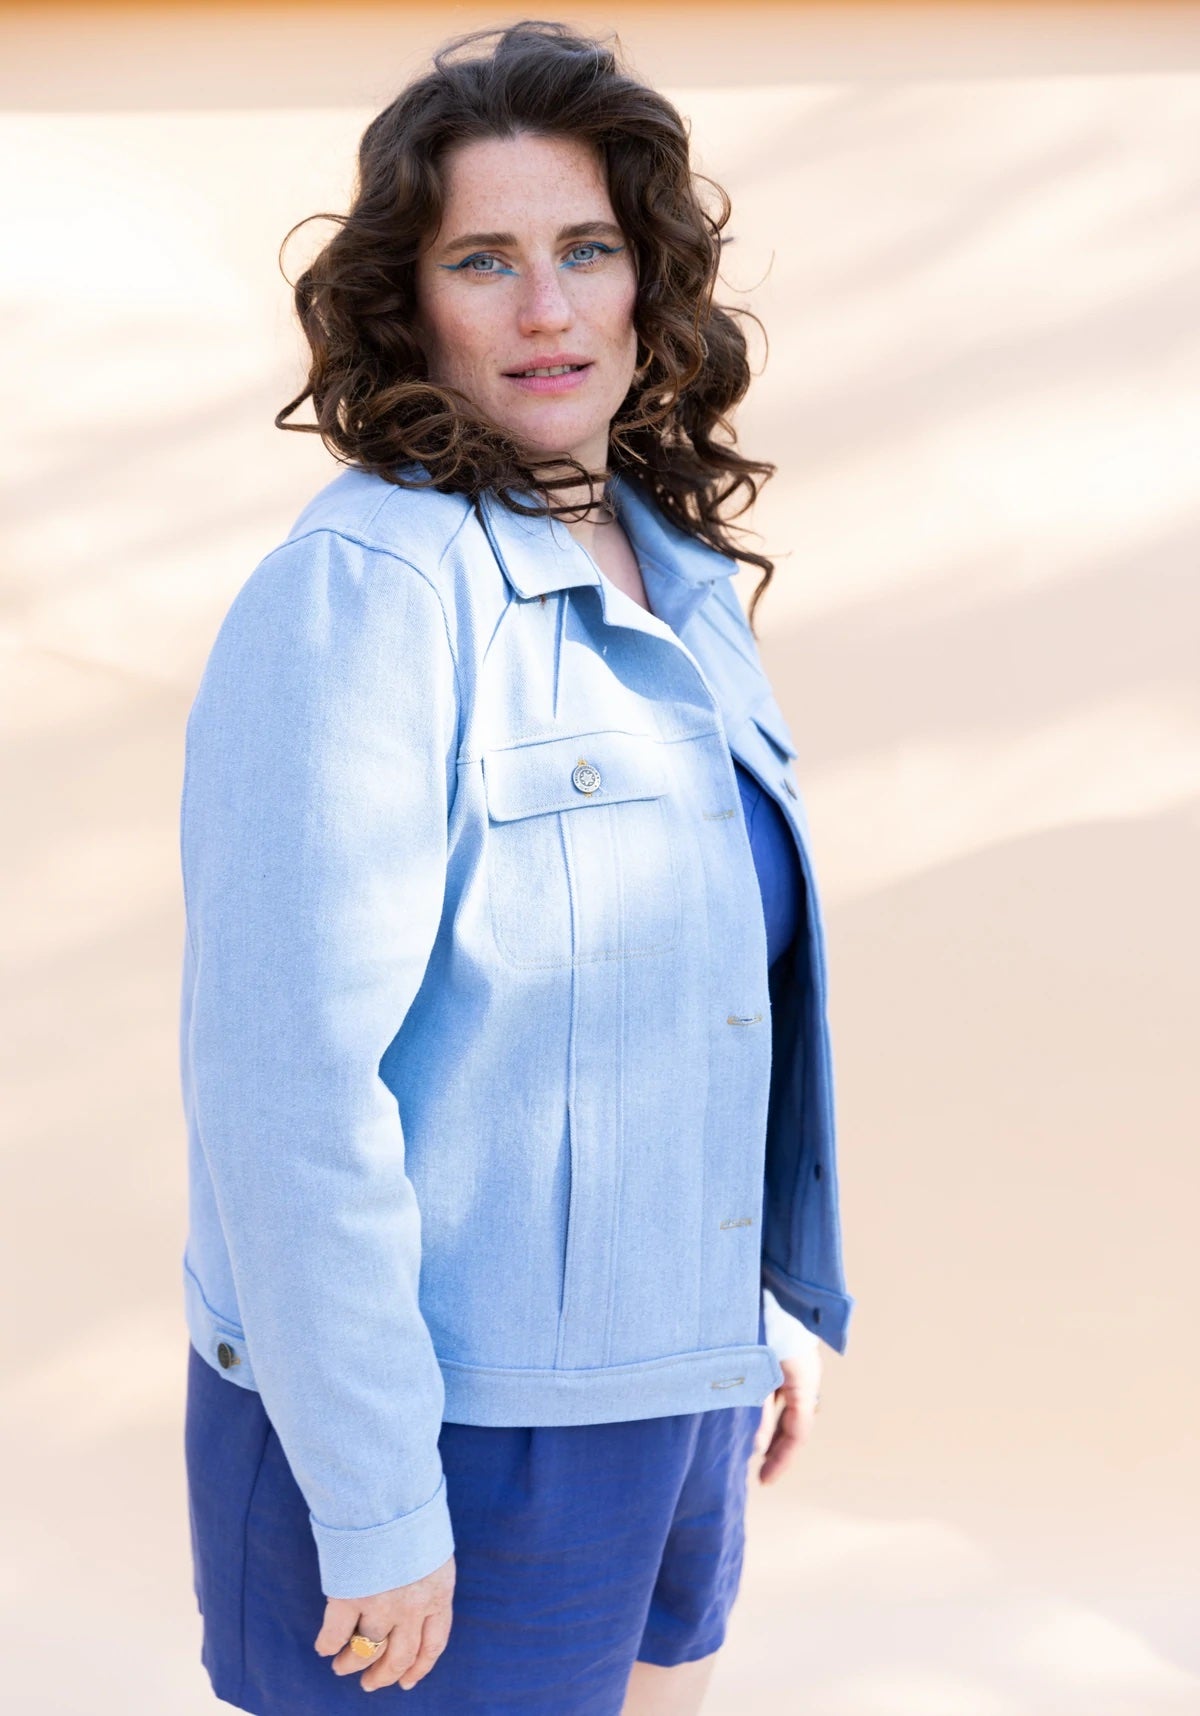 Woman wearing the Pilar Jacket sewing pattern from Maison Fauve on The Fold Line. A denim jacket pattern made in denim, wool, jacquard or gabardine fabrics, featuring a flat collar, front yoke with stitched darts, back yoke, front button closure, front ch